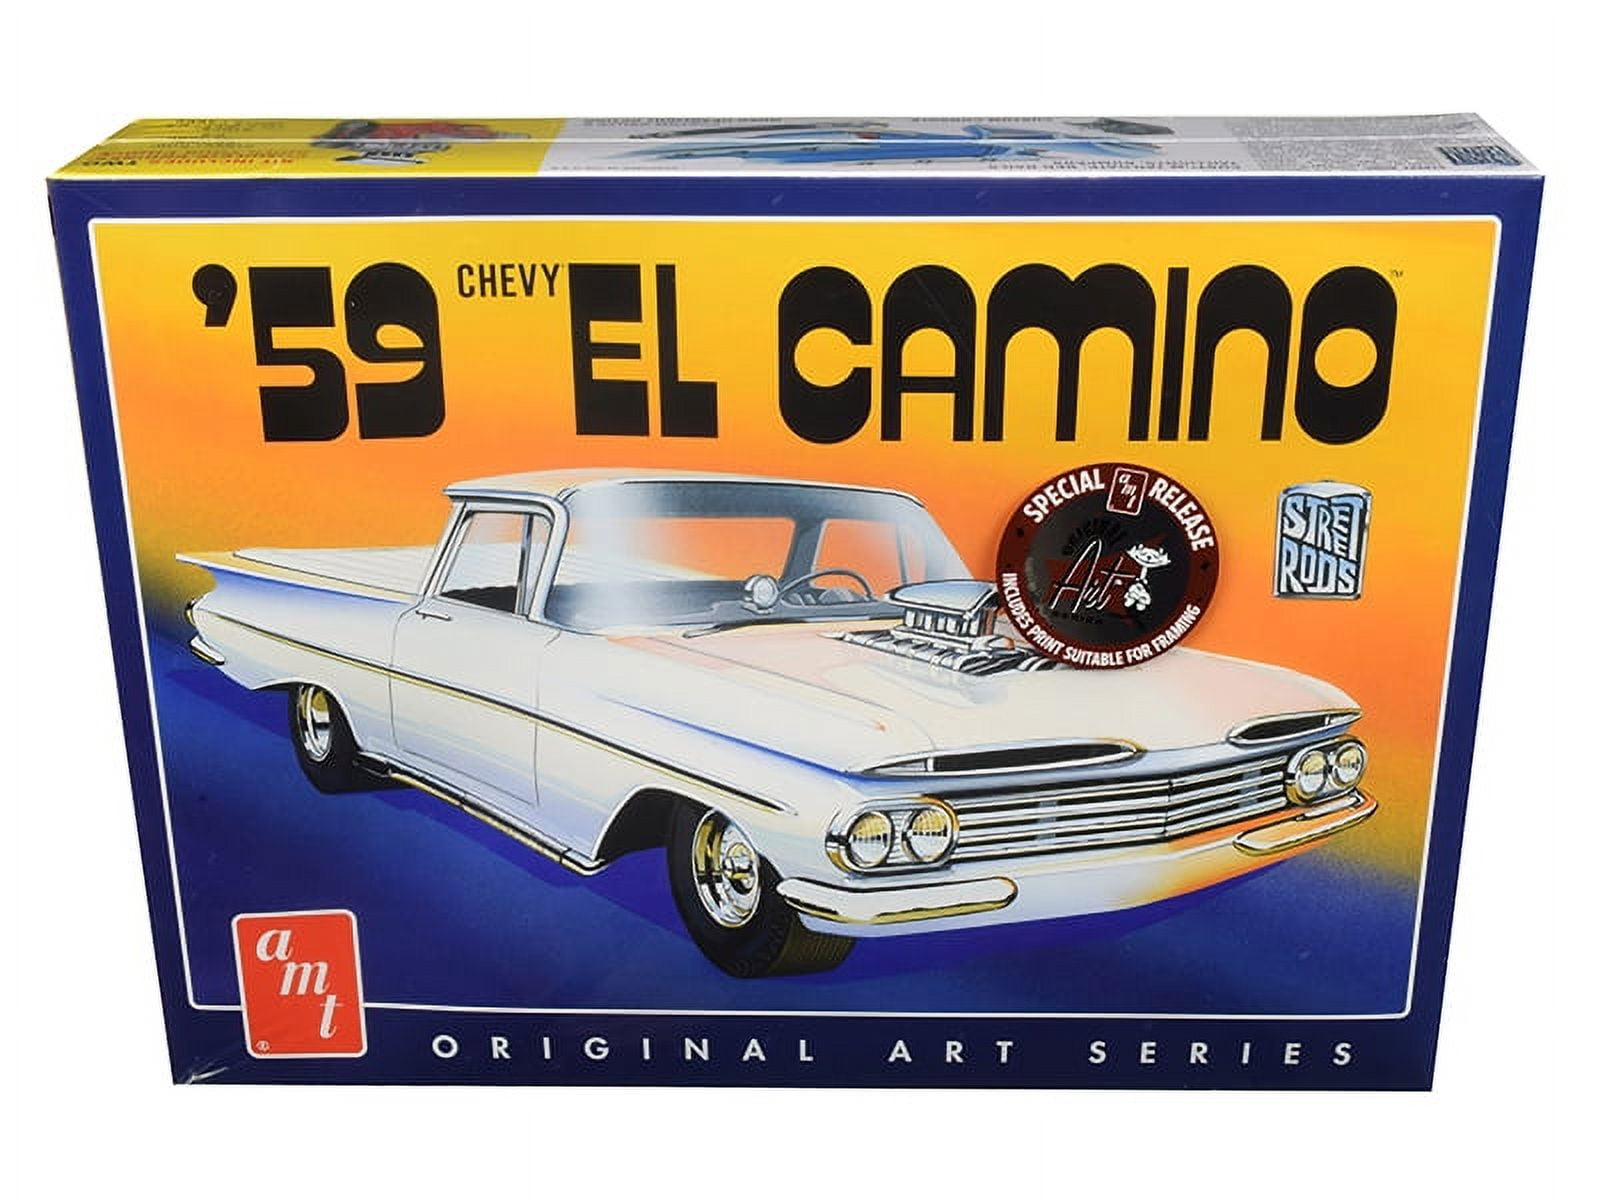 Picture of AMT AMT1058 Skill 2 Model Kit 1959 Chevrolet El Camino 2 in 1 Kit with Original Art Series 1 by 25 Scale Model